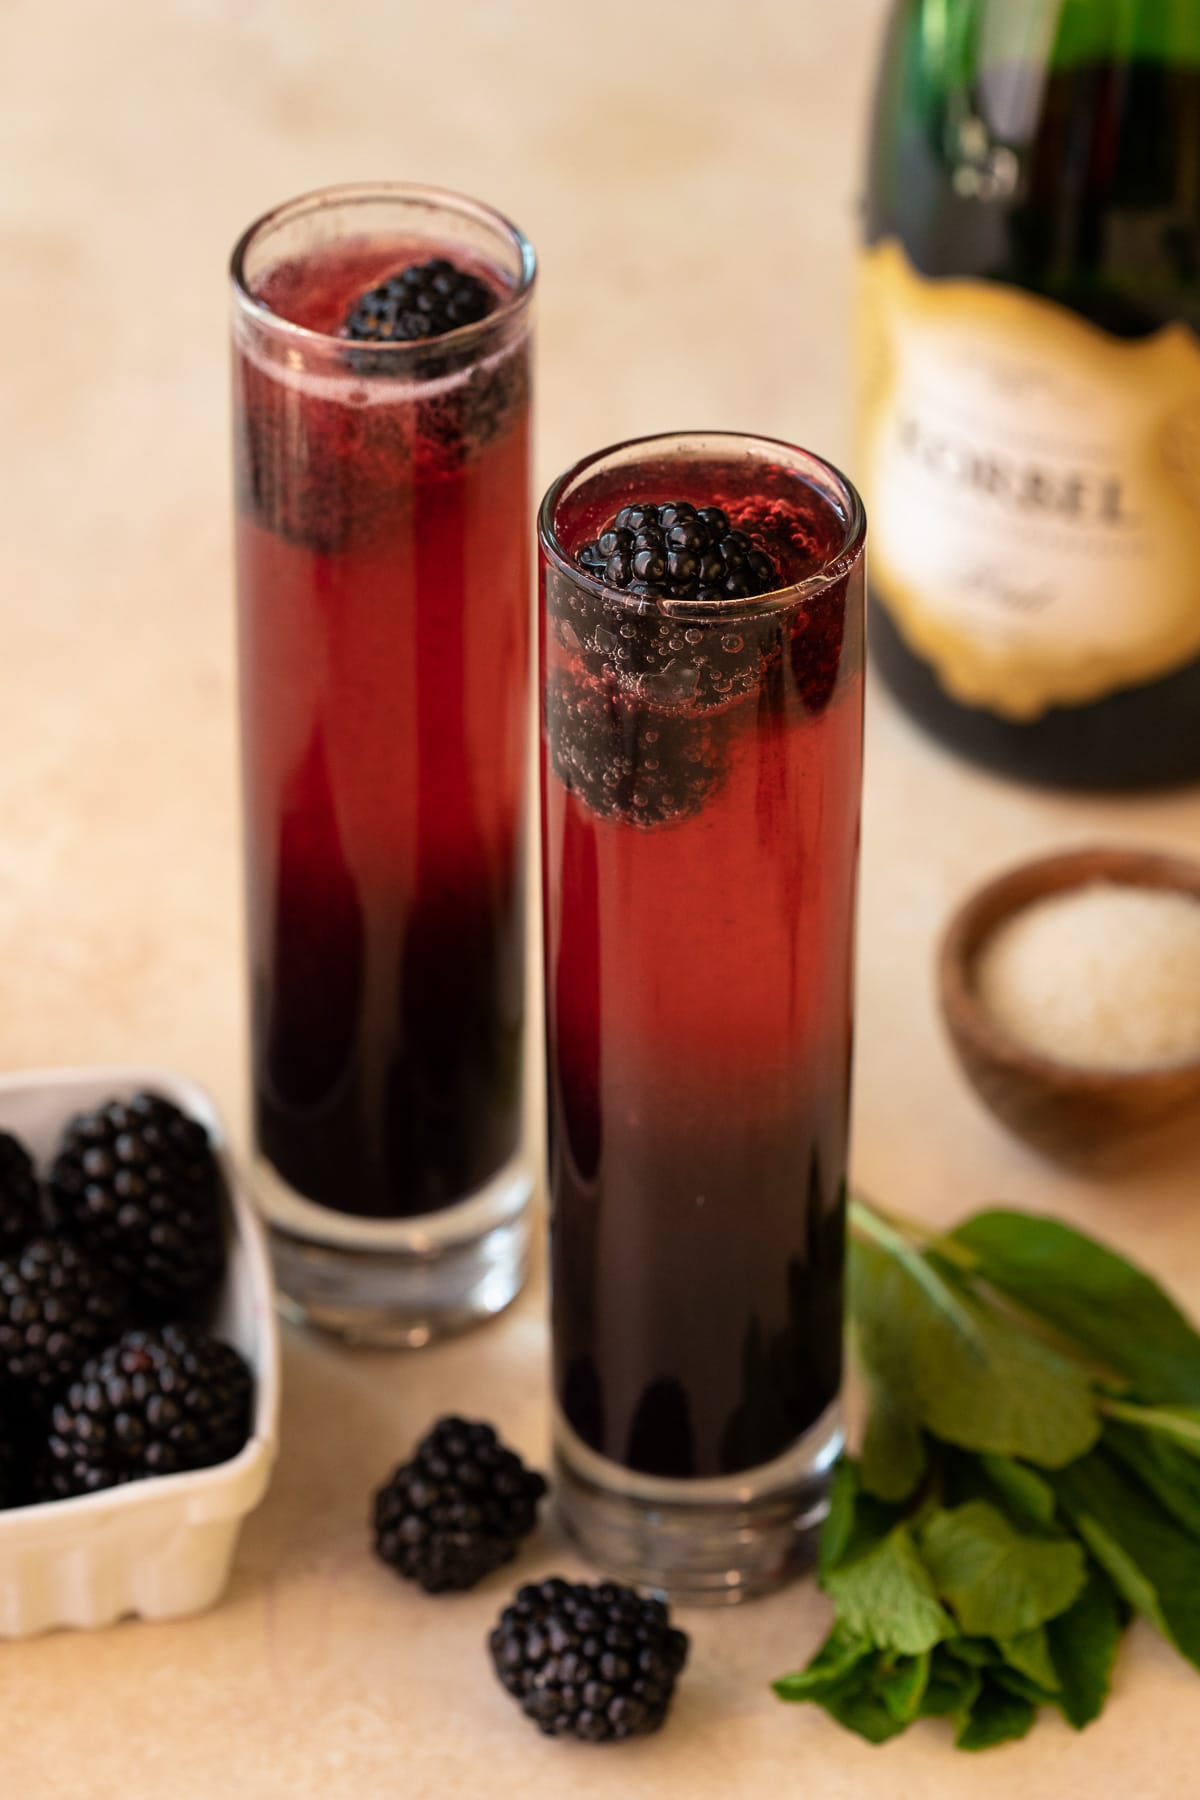 Two mimosas in champagne glasses garnished with fresh blackberries.